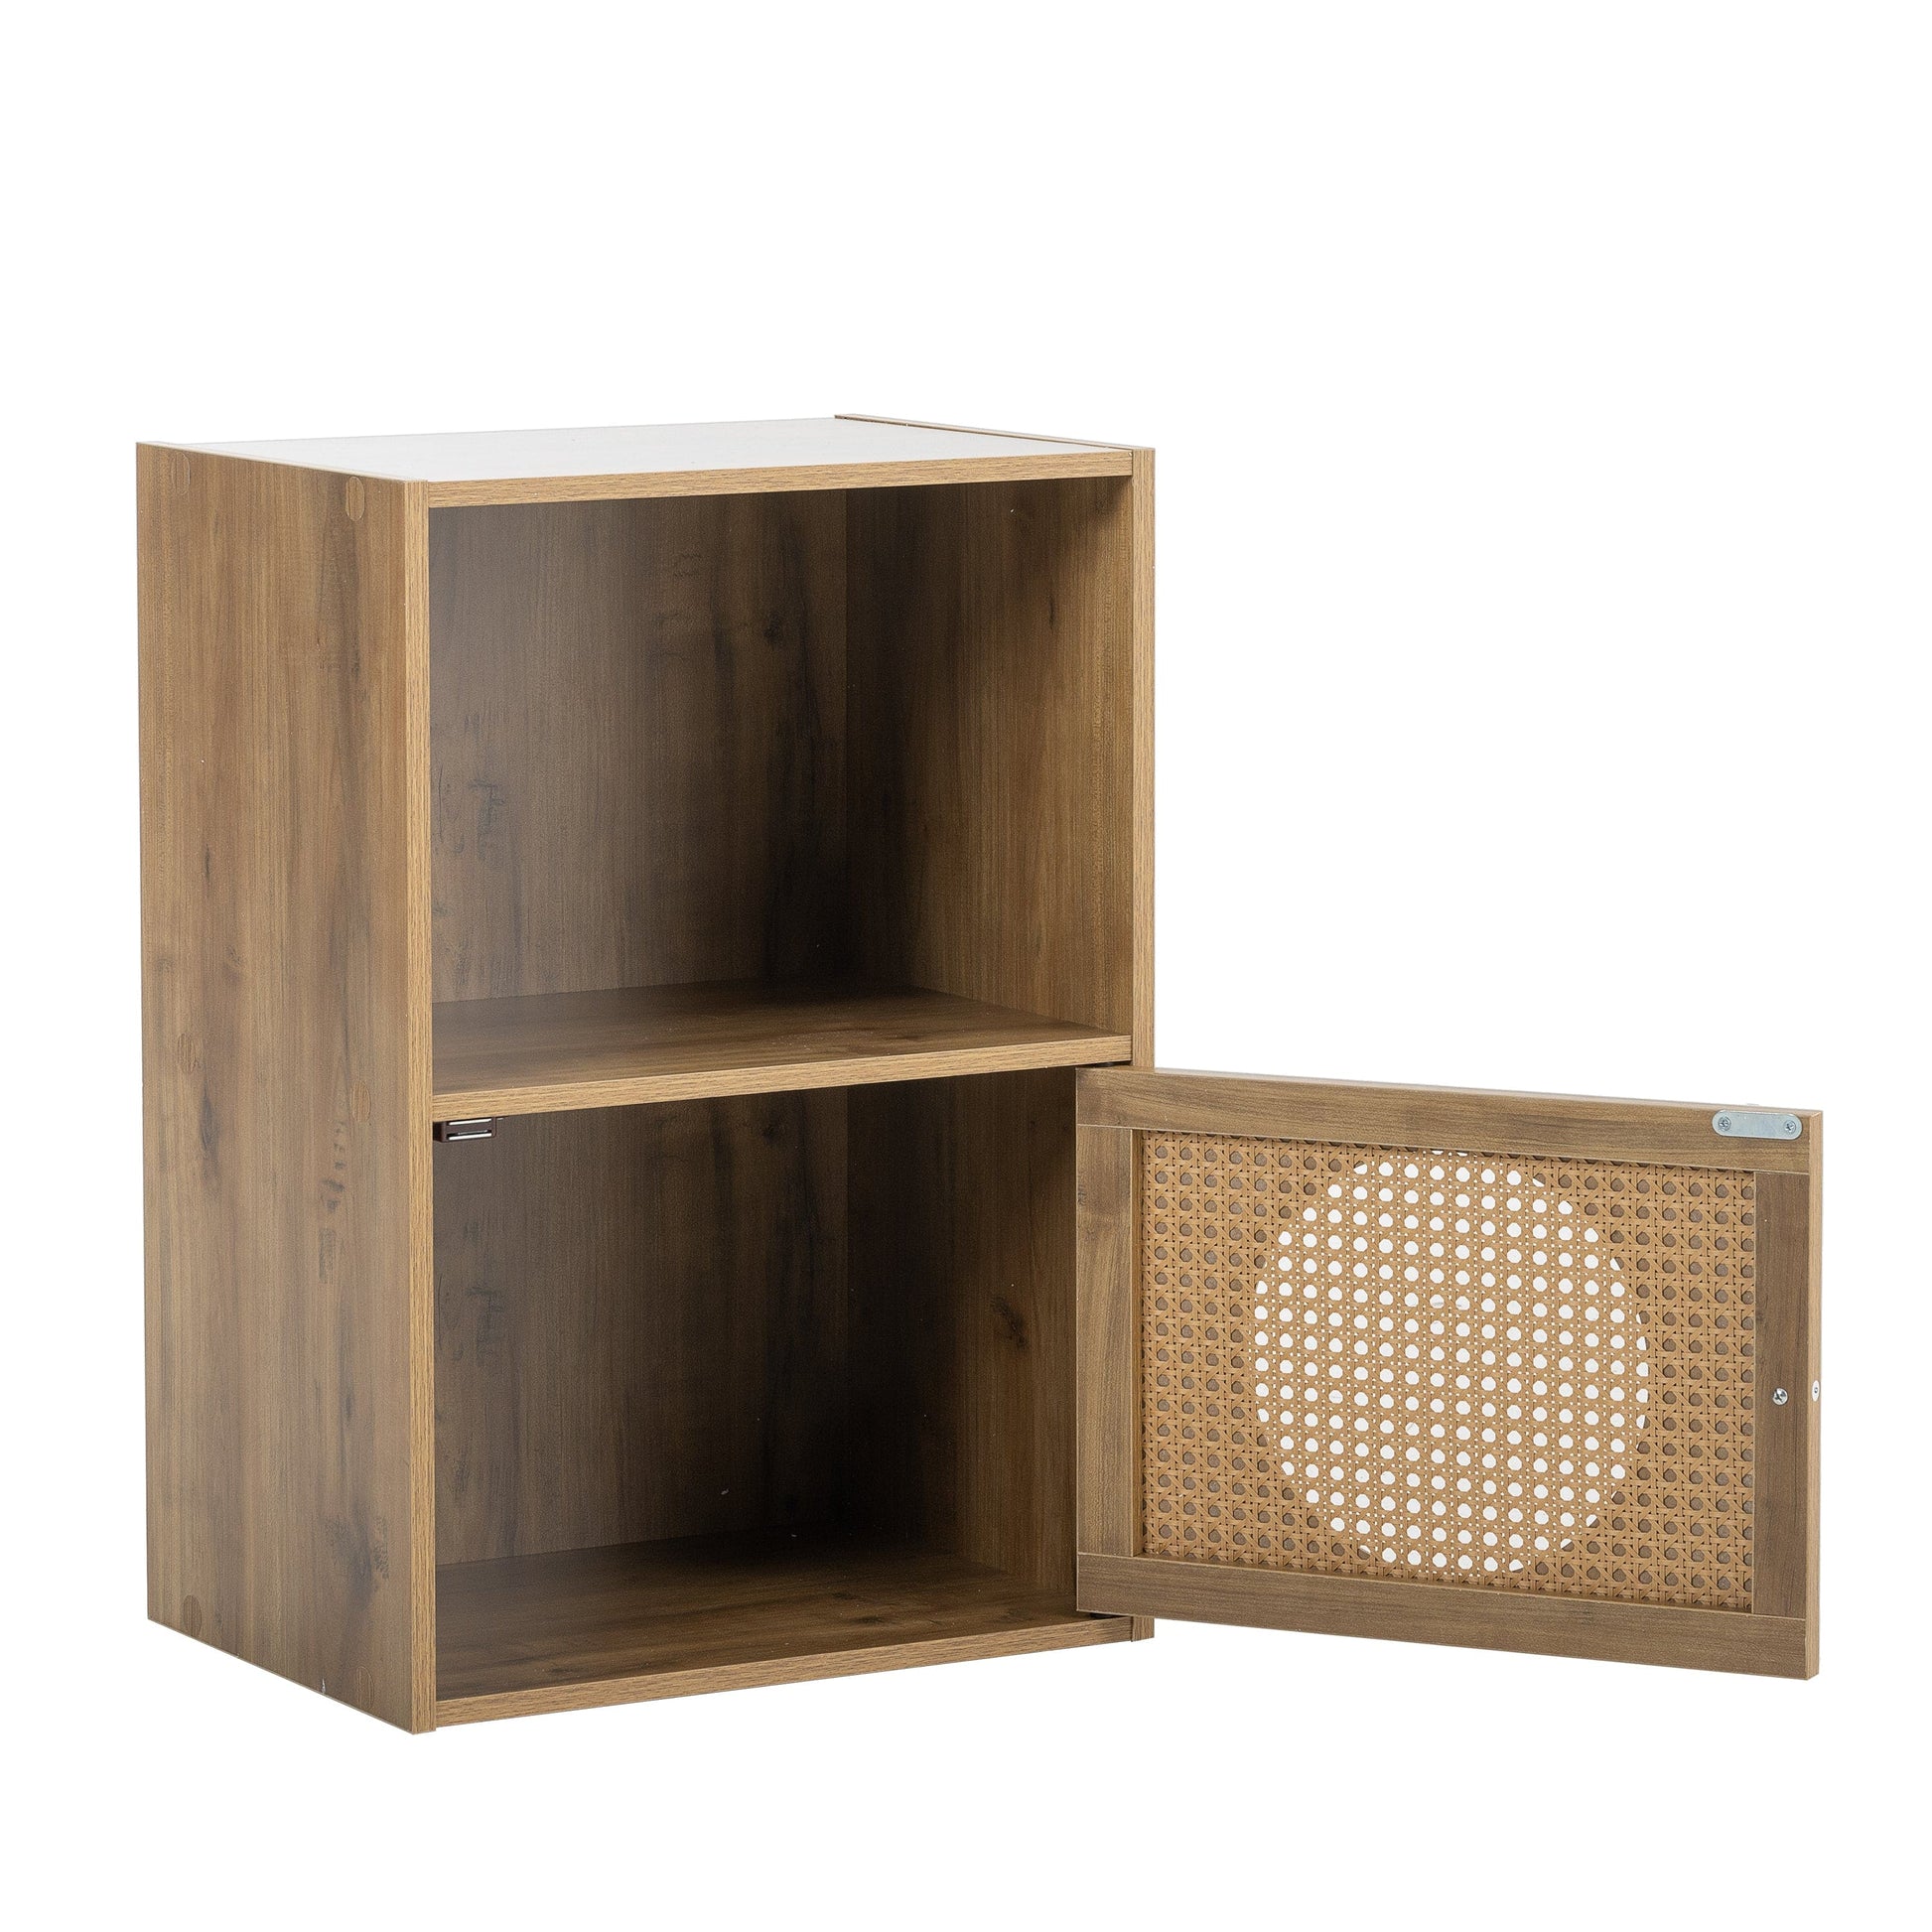 1st Choice Furniture Direct Cabinet 1st Choice Small Bathroom Storage Cabinet with Rustic Brown Finish